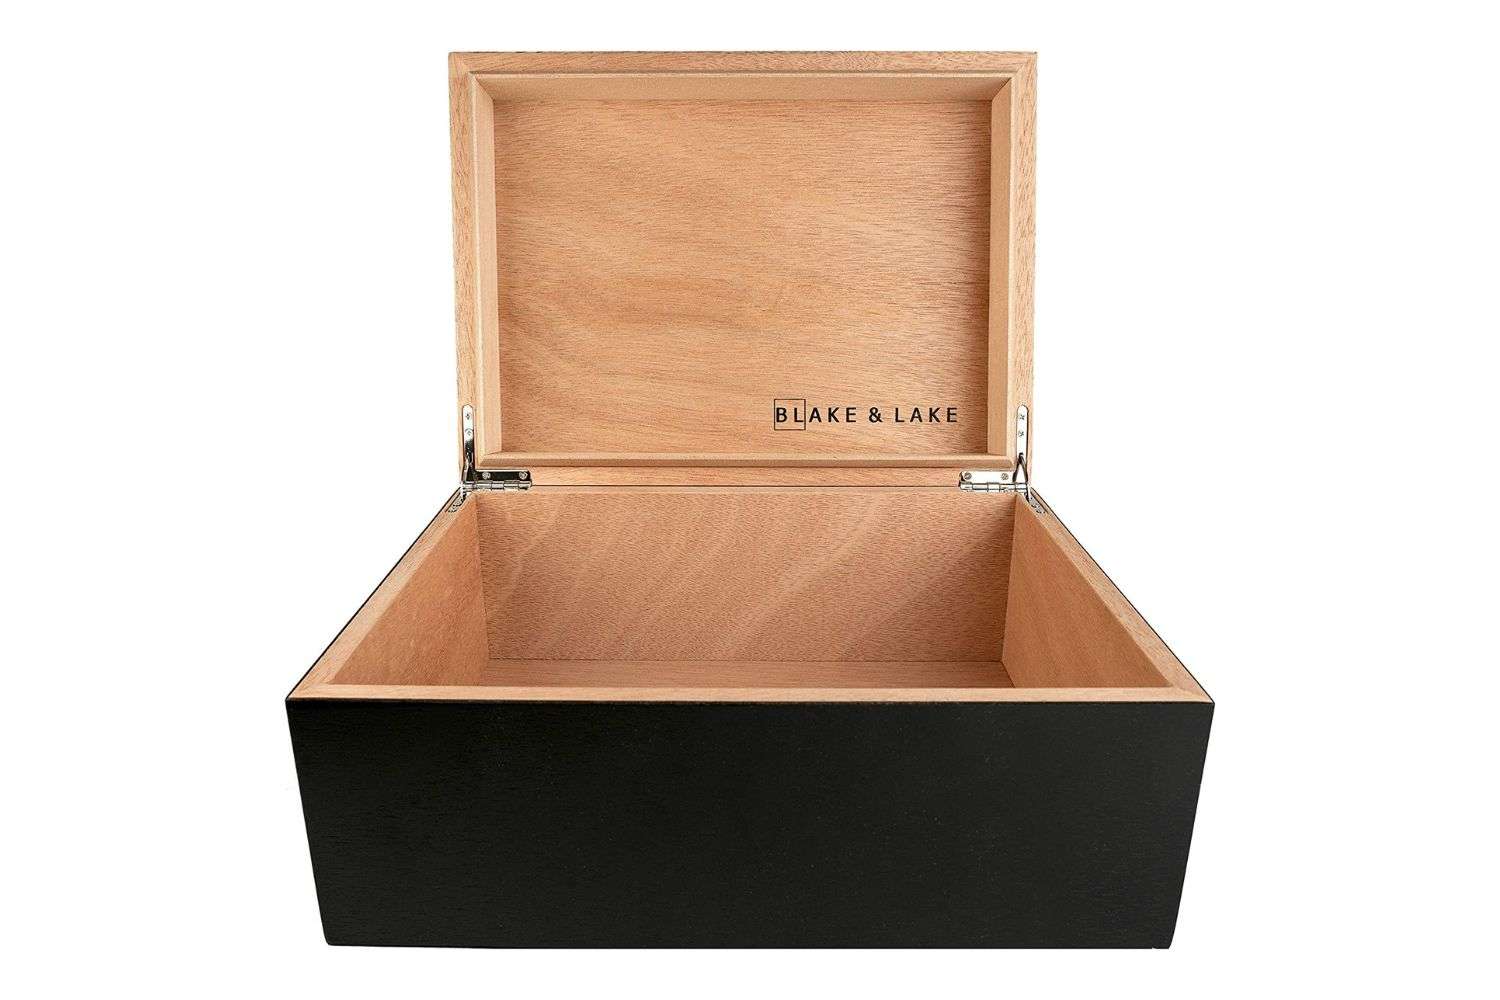 Buyers' Guide: 7 Best Photo Storage Boxes for 2023